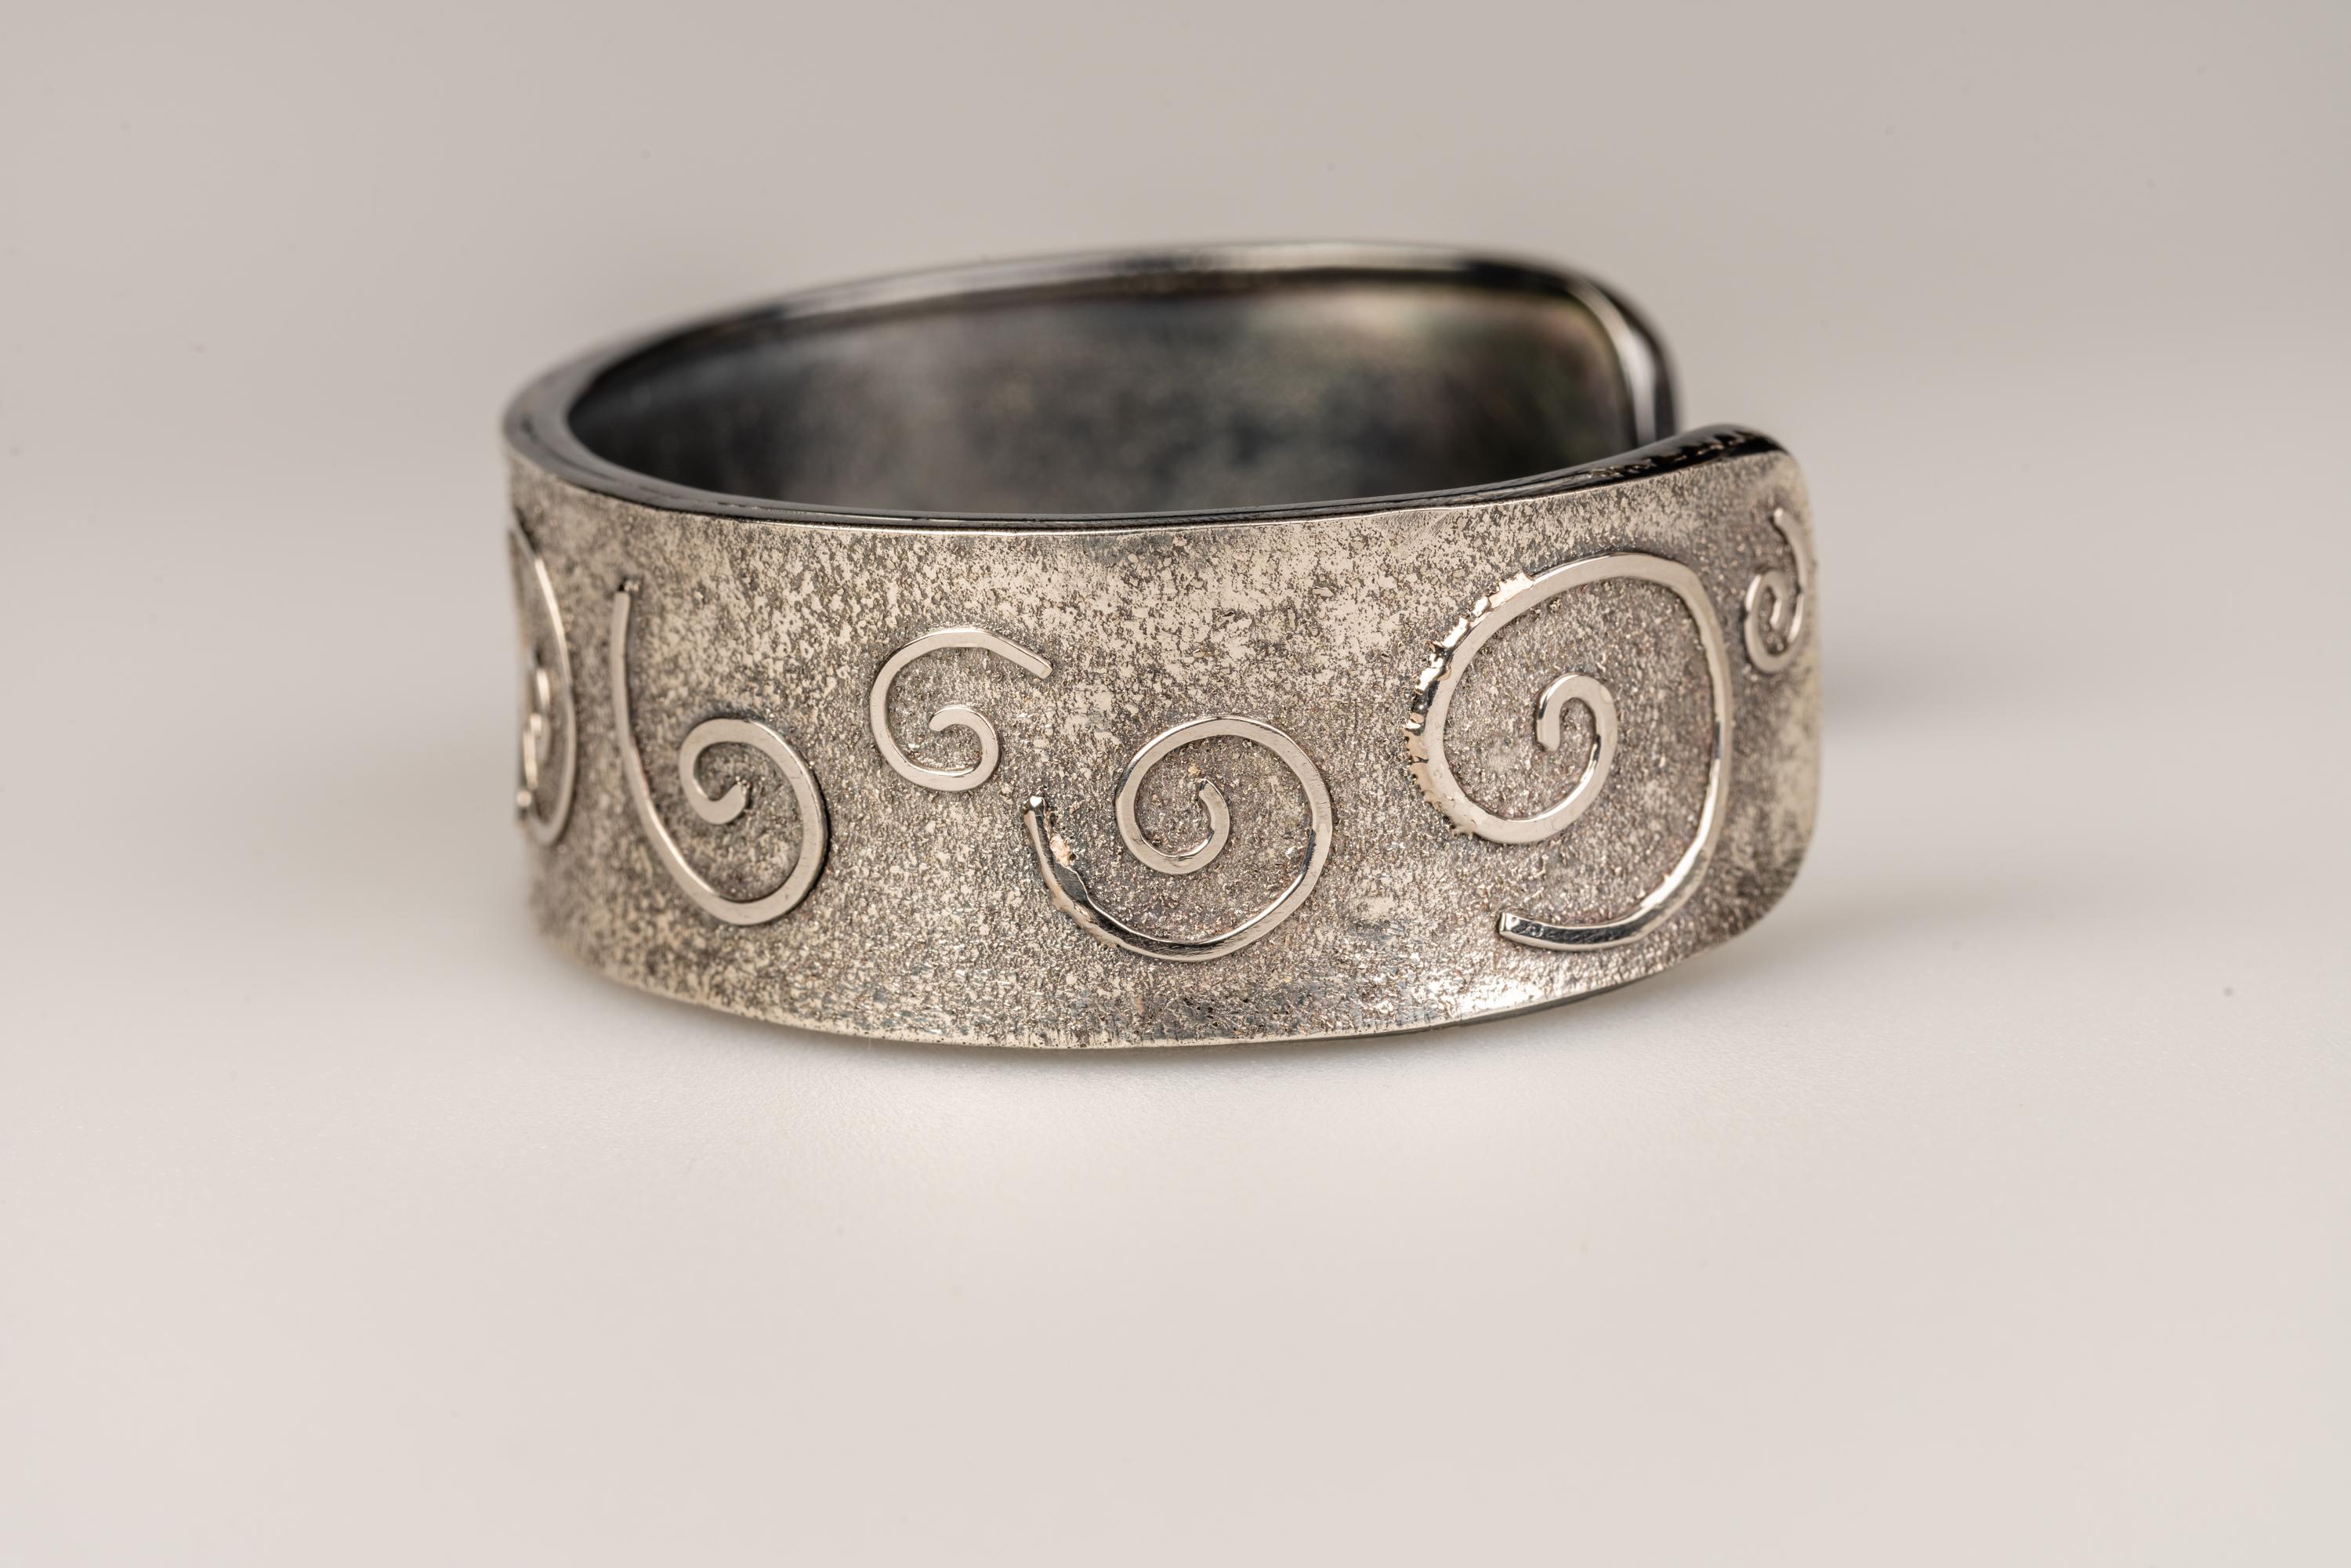 An oxidized sterling silver small swirly cuff with platinum dust and platinum wire fused to the surface. This cuff was made and designed by llyn strong.